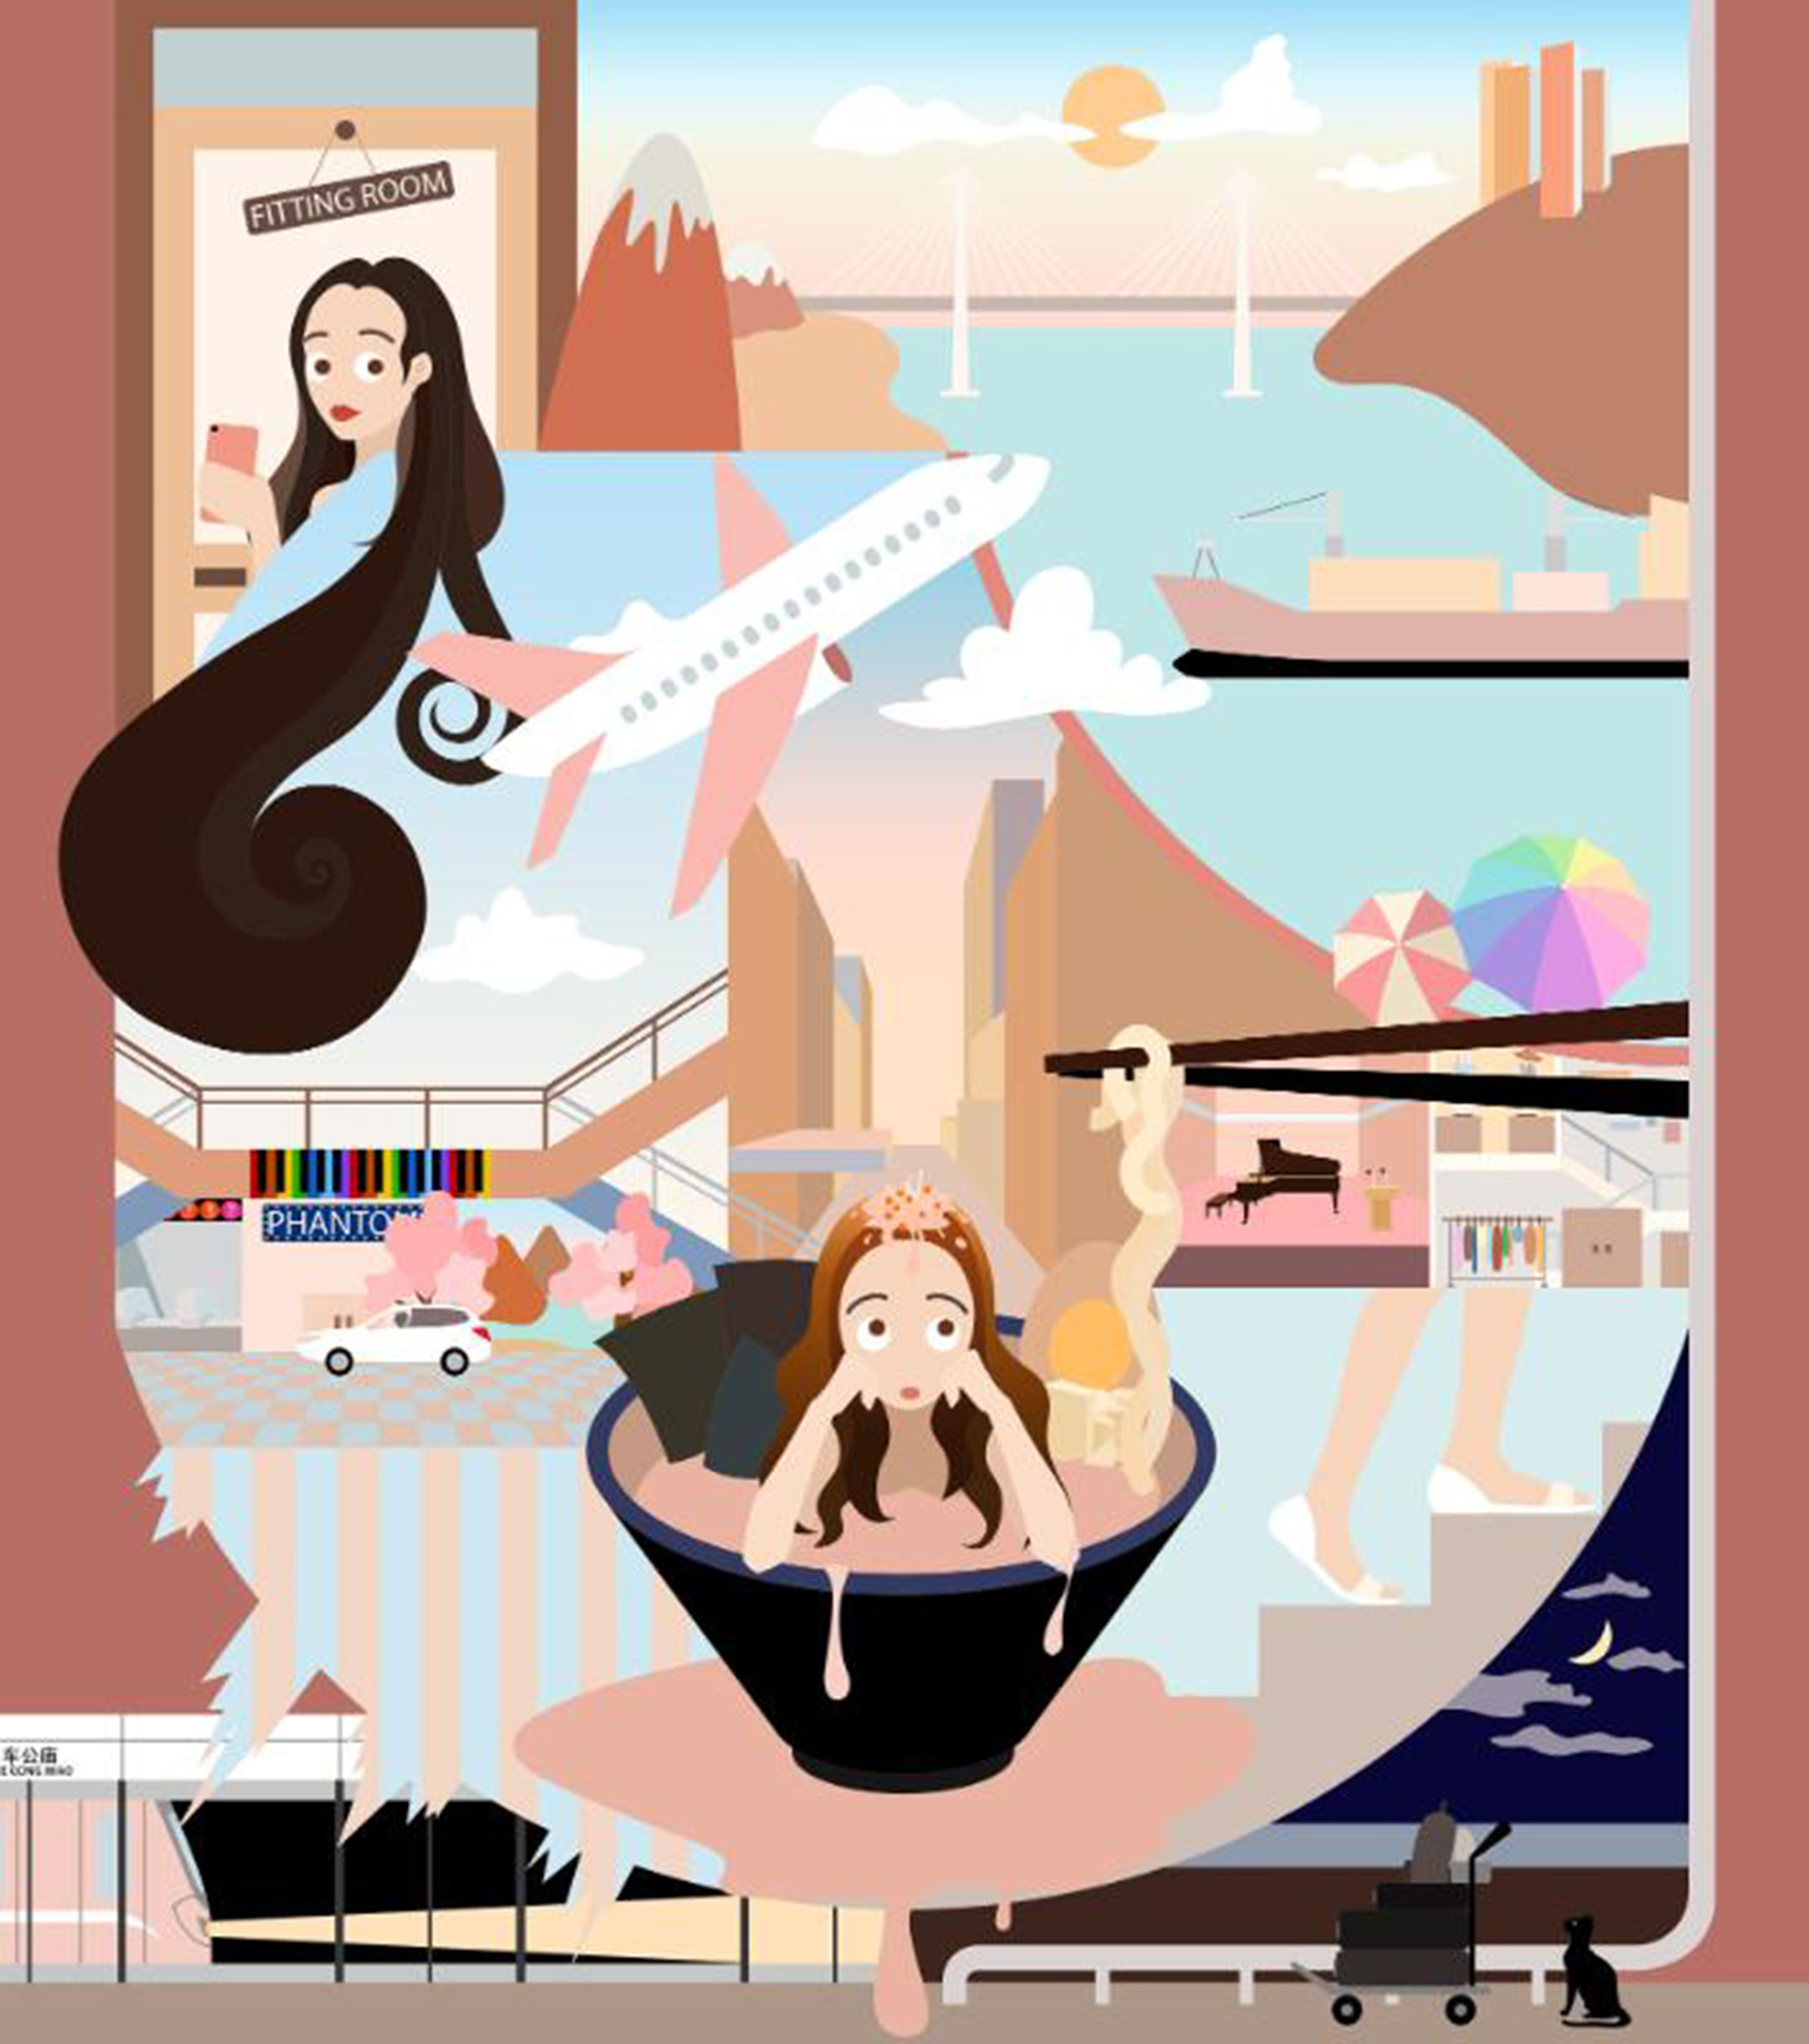 Illustration of a young woman in a ramen bowl surrounded by images of travel and other whimsical things